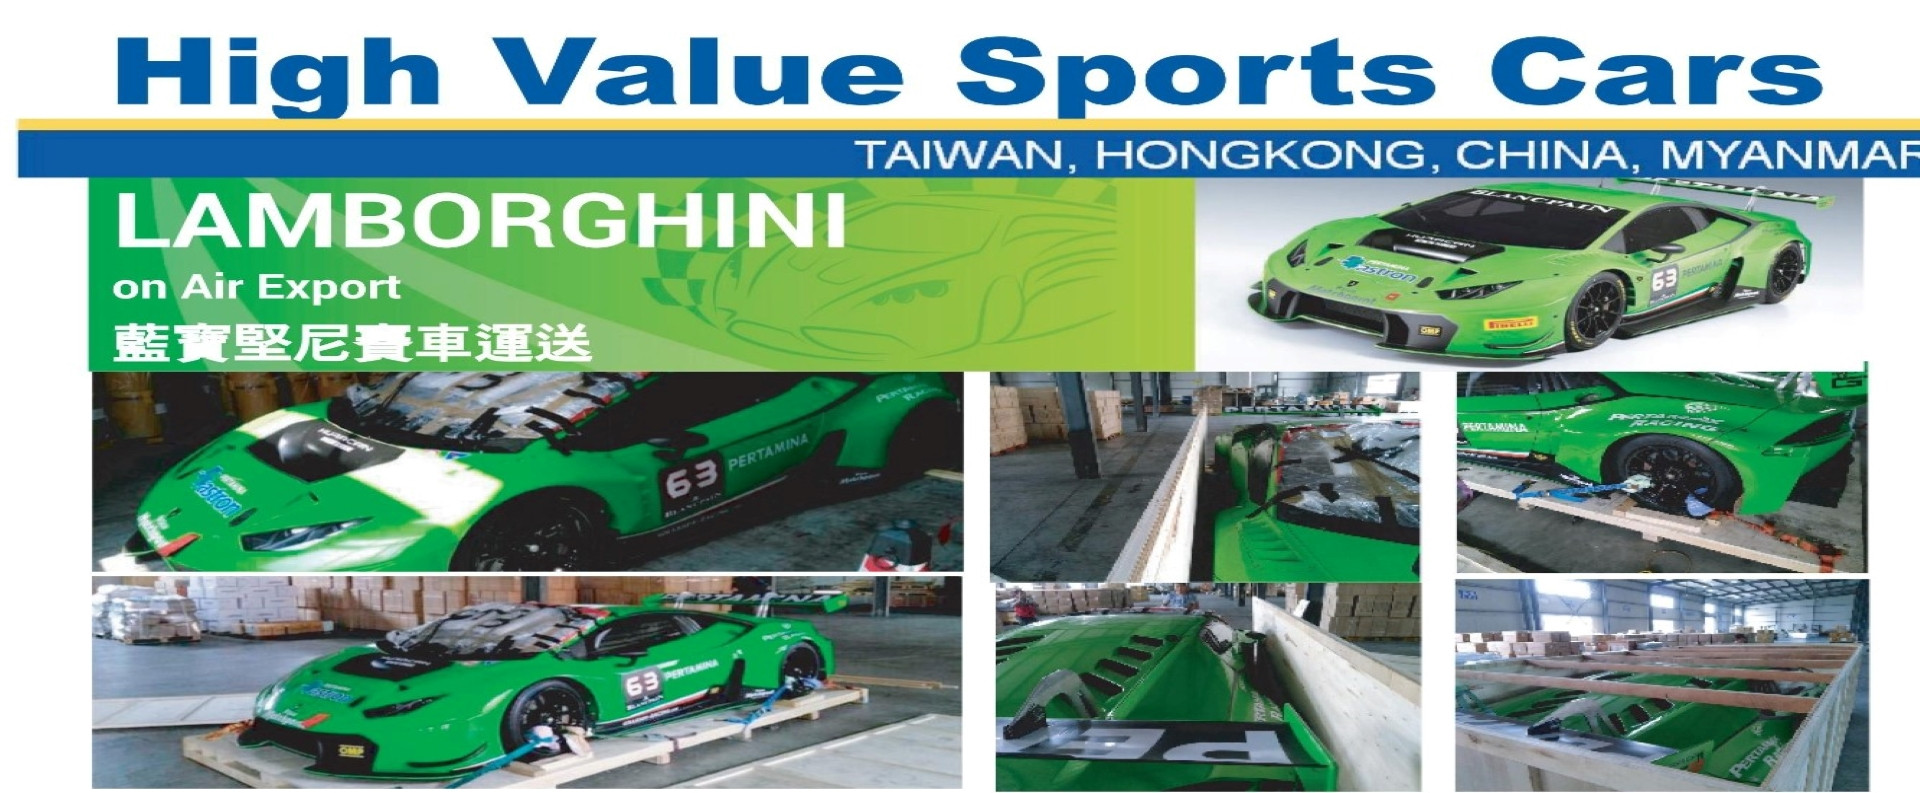 High Value Sports Cars